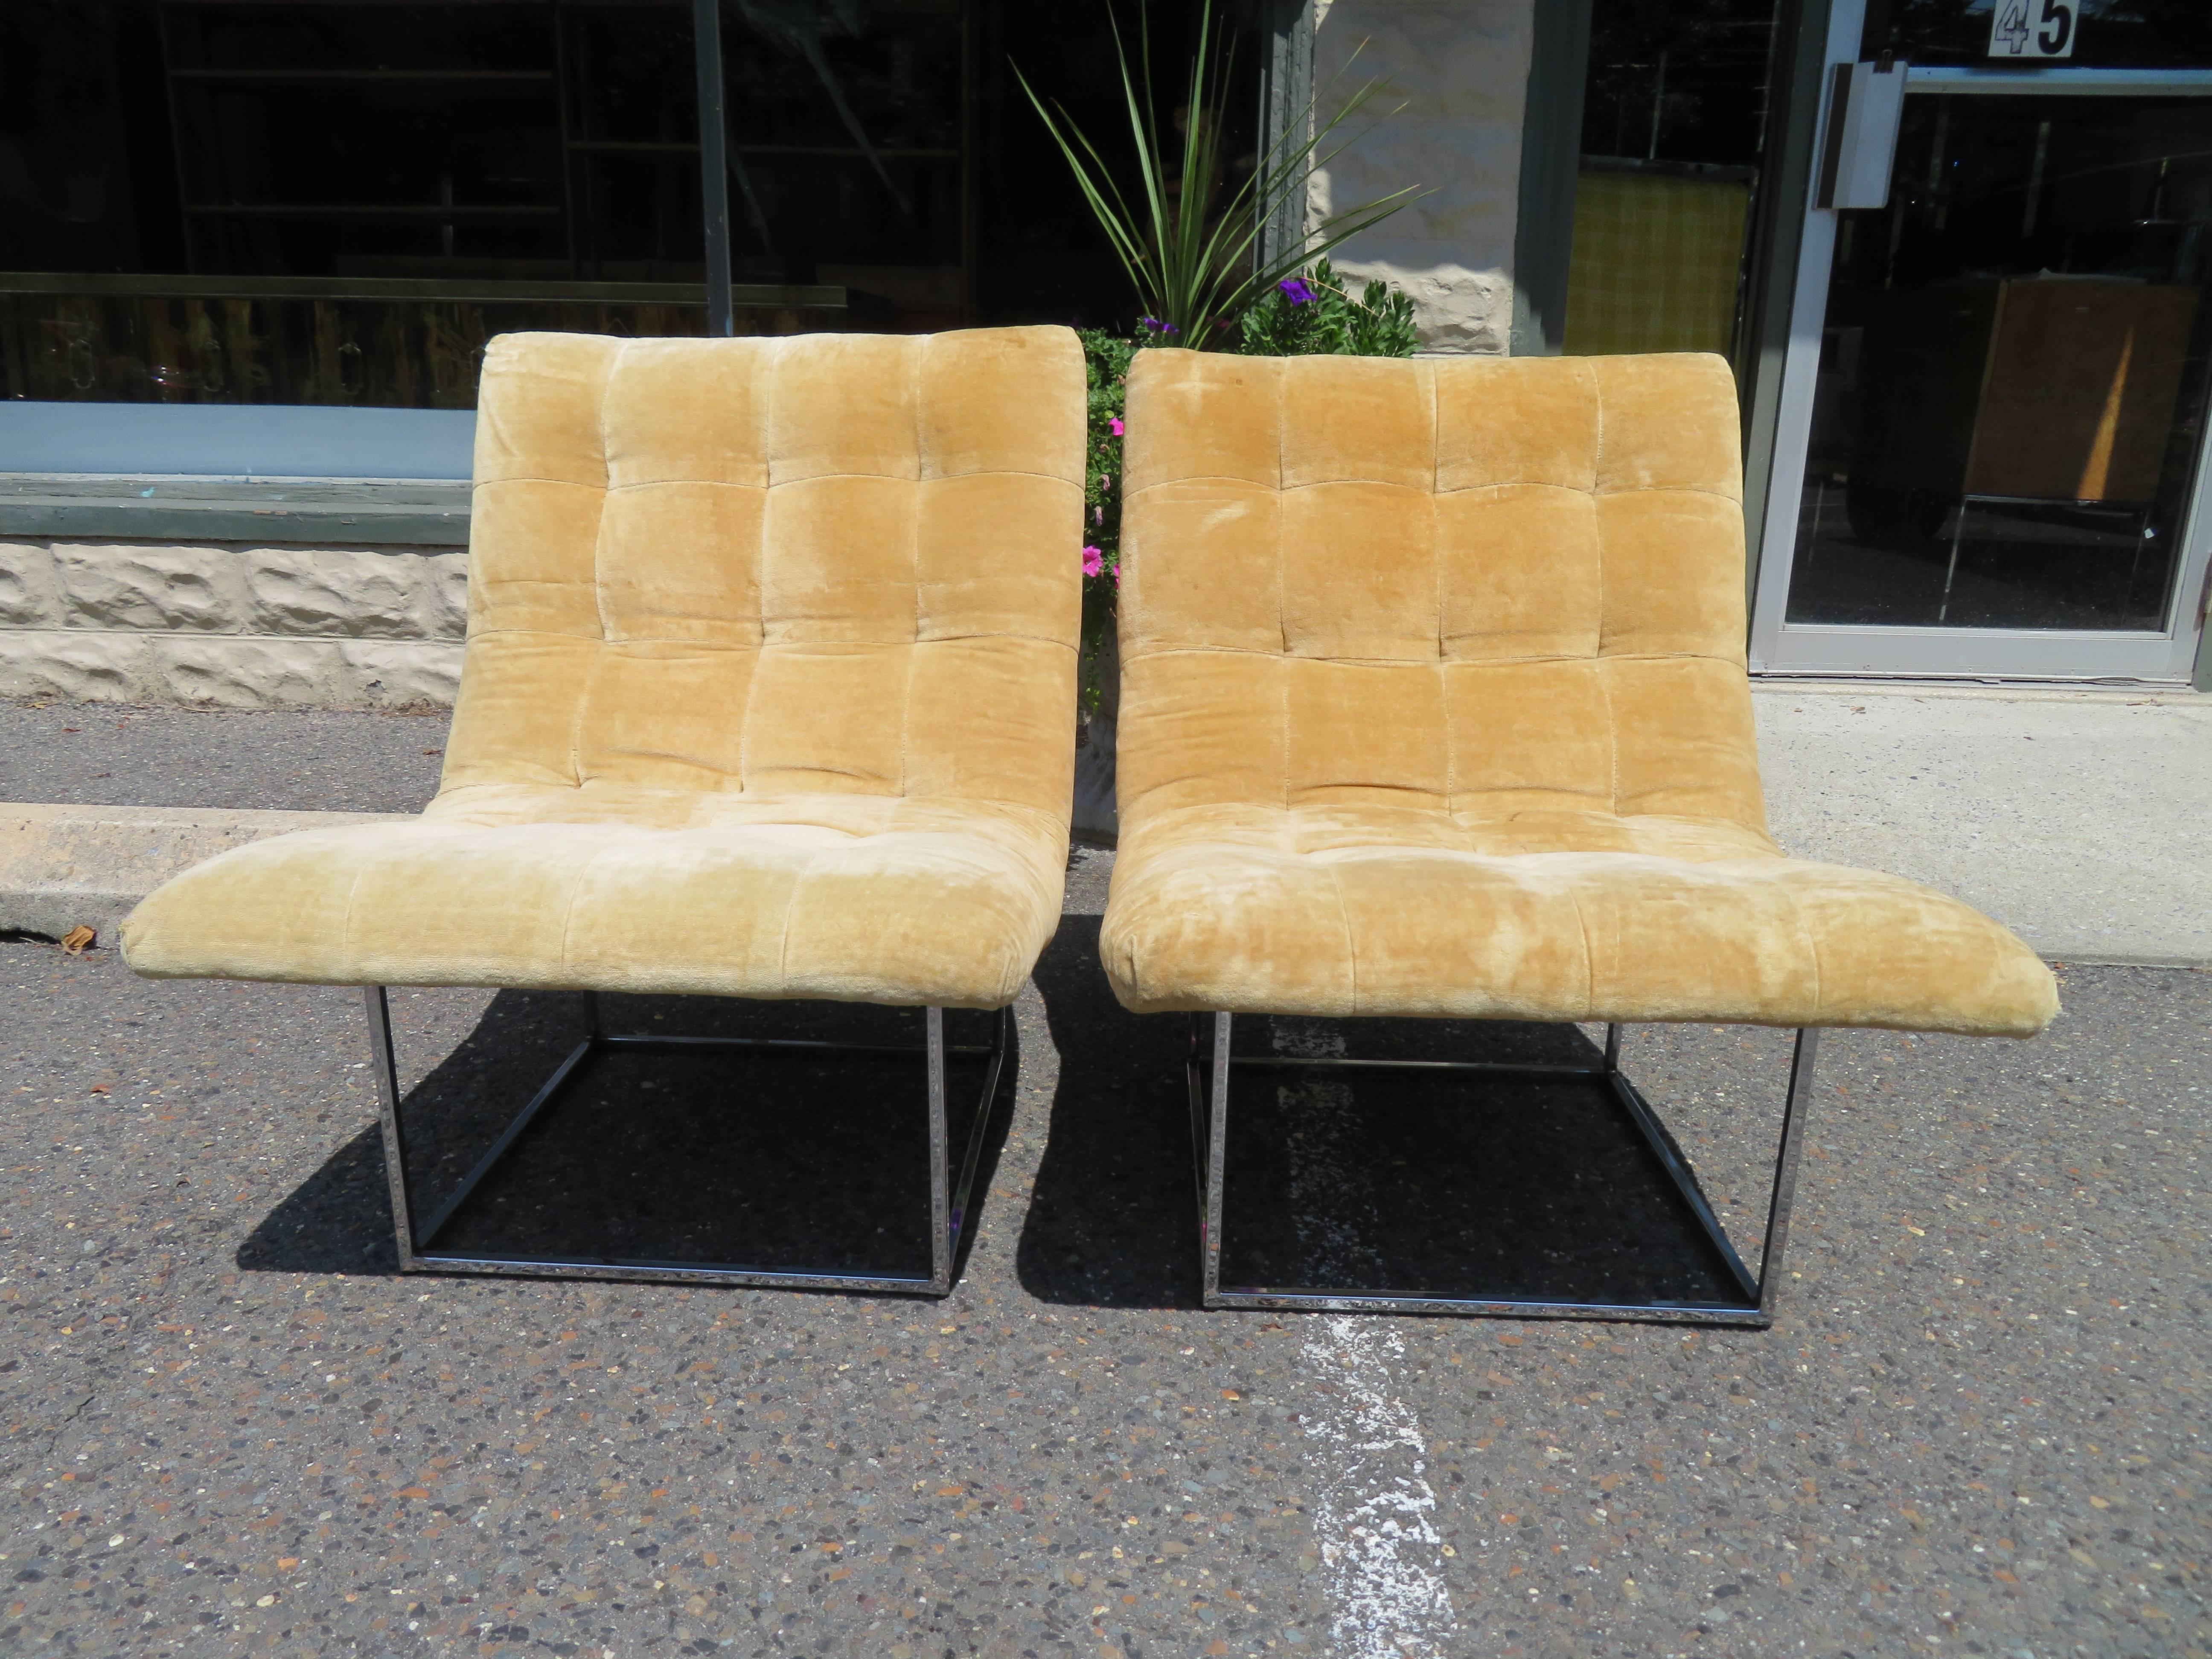 Fabulous pair of Milo Baughman signed Thayer Coggin scoop chairs with thin chrome frame. You know it's nice to see a really great pair of authentic Milo Baughman vintage chairs with their labels attached when all you see now a days are shiny new